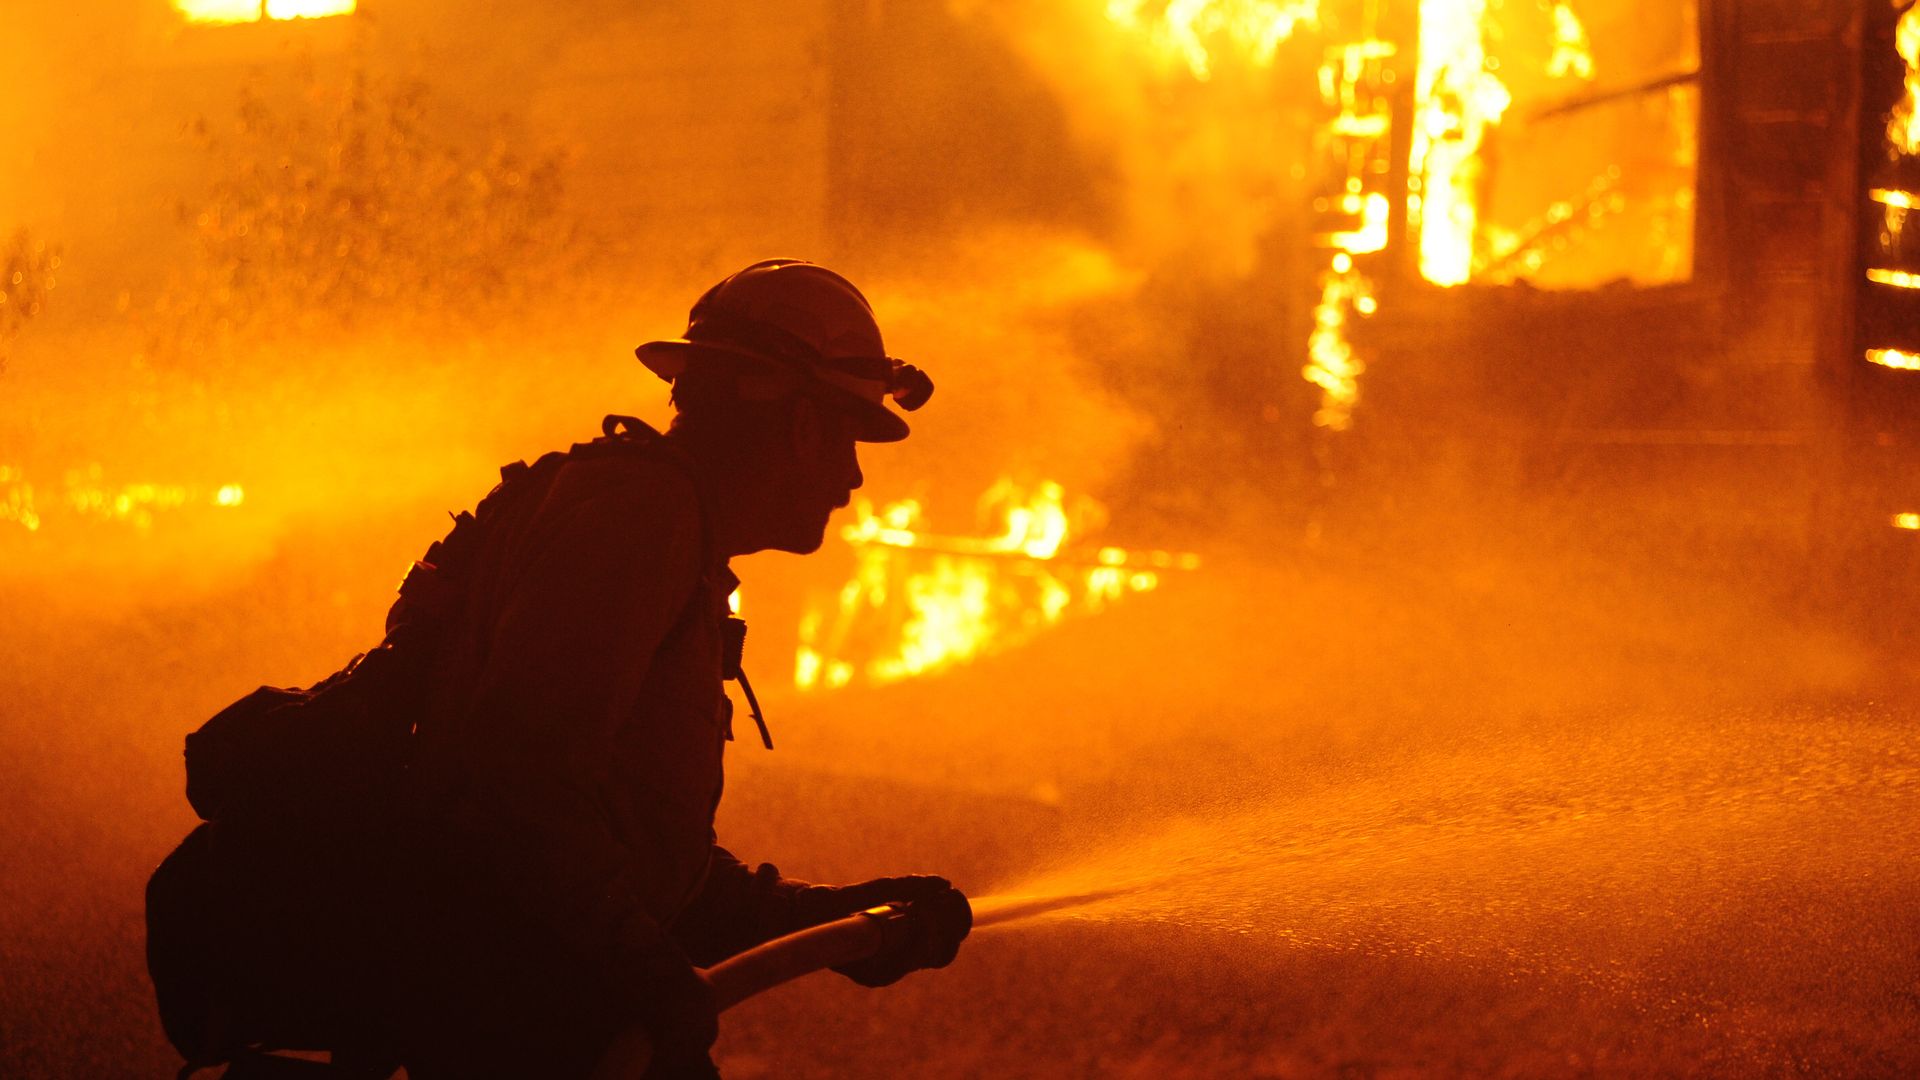 Firefighters try to extinguish Dixie Fire near Chico in Greenville, California, United States on August 5